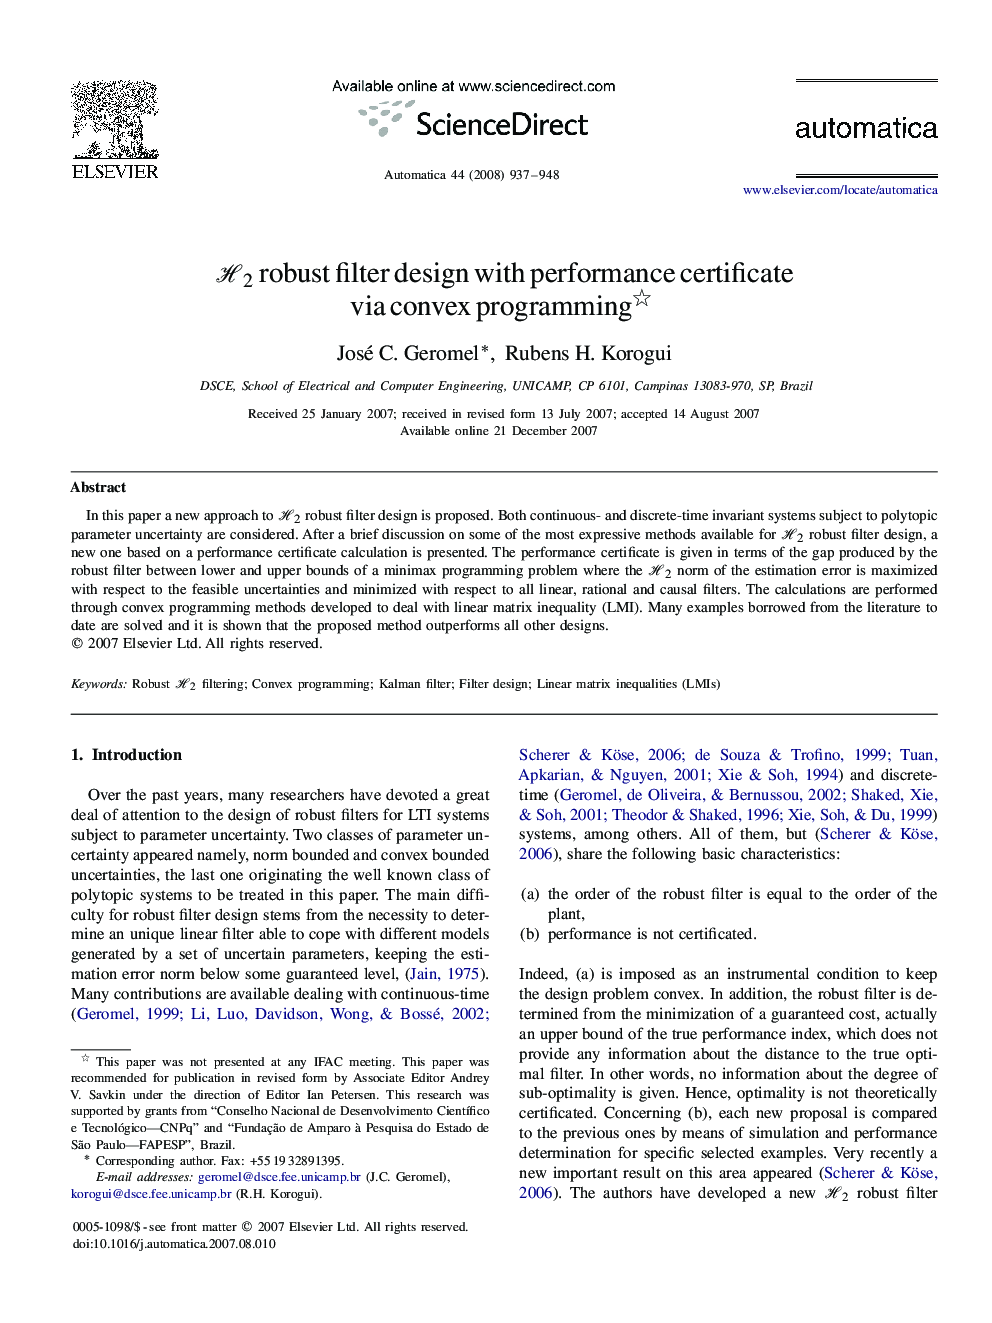 H2H2 robust filter design with performance certificate via convex programming 